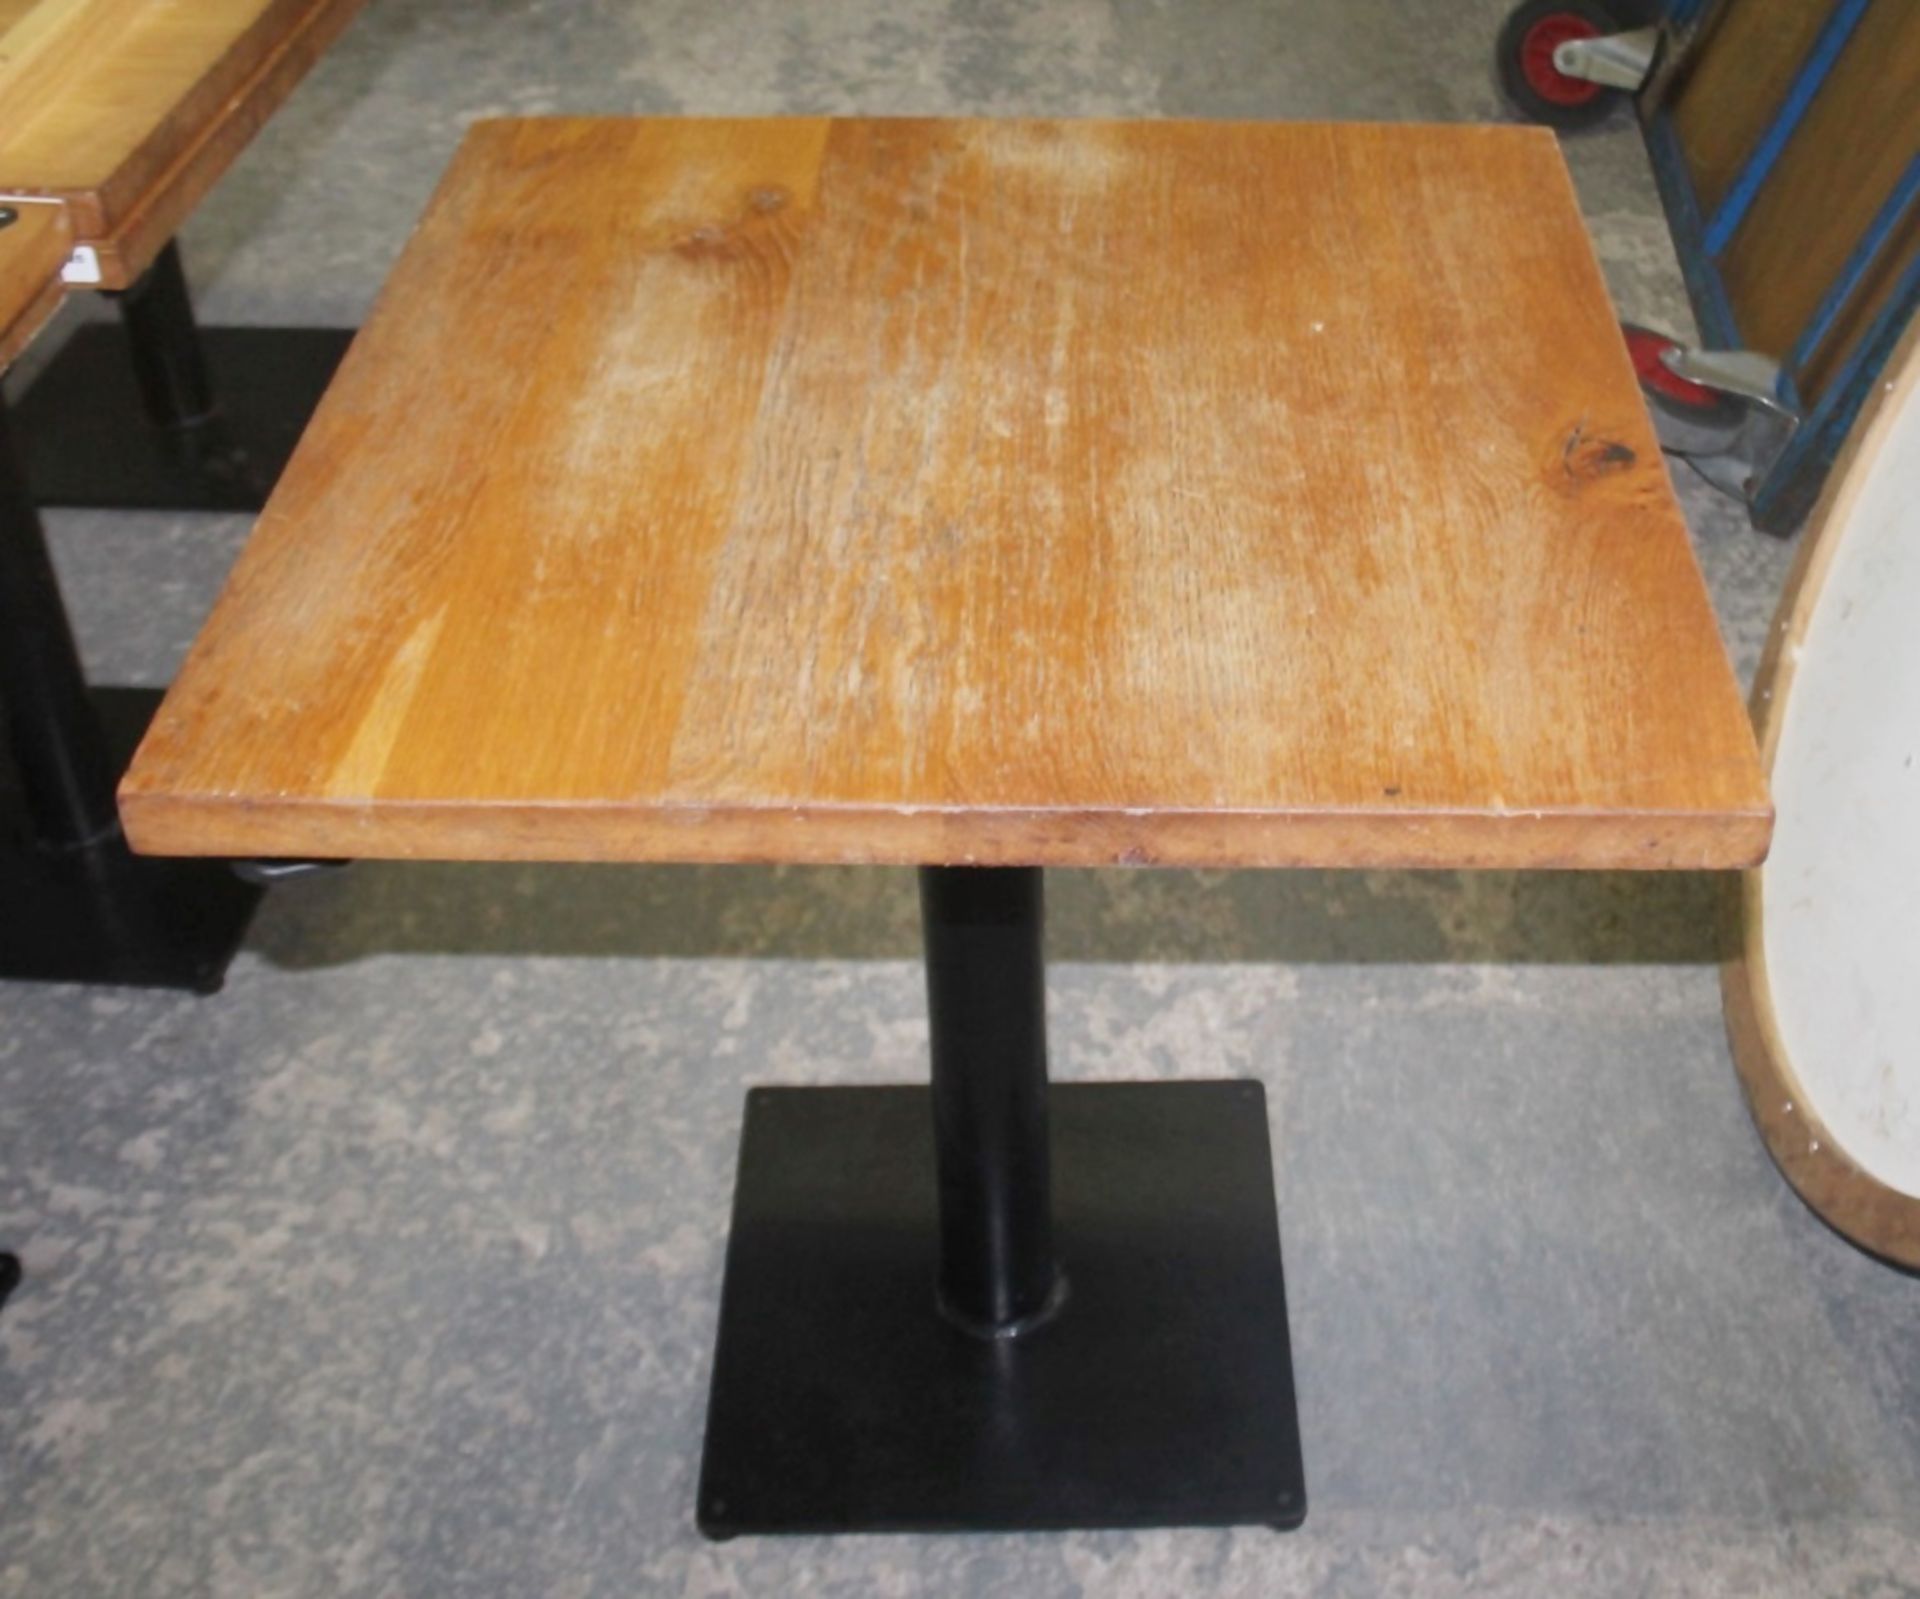 4 x Solid Oak Restaurant Dining Tables - Natural Rustic Knotty Oak Tops With Black Cast Iron Bases - Image 5 of 8